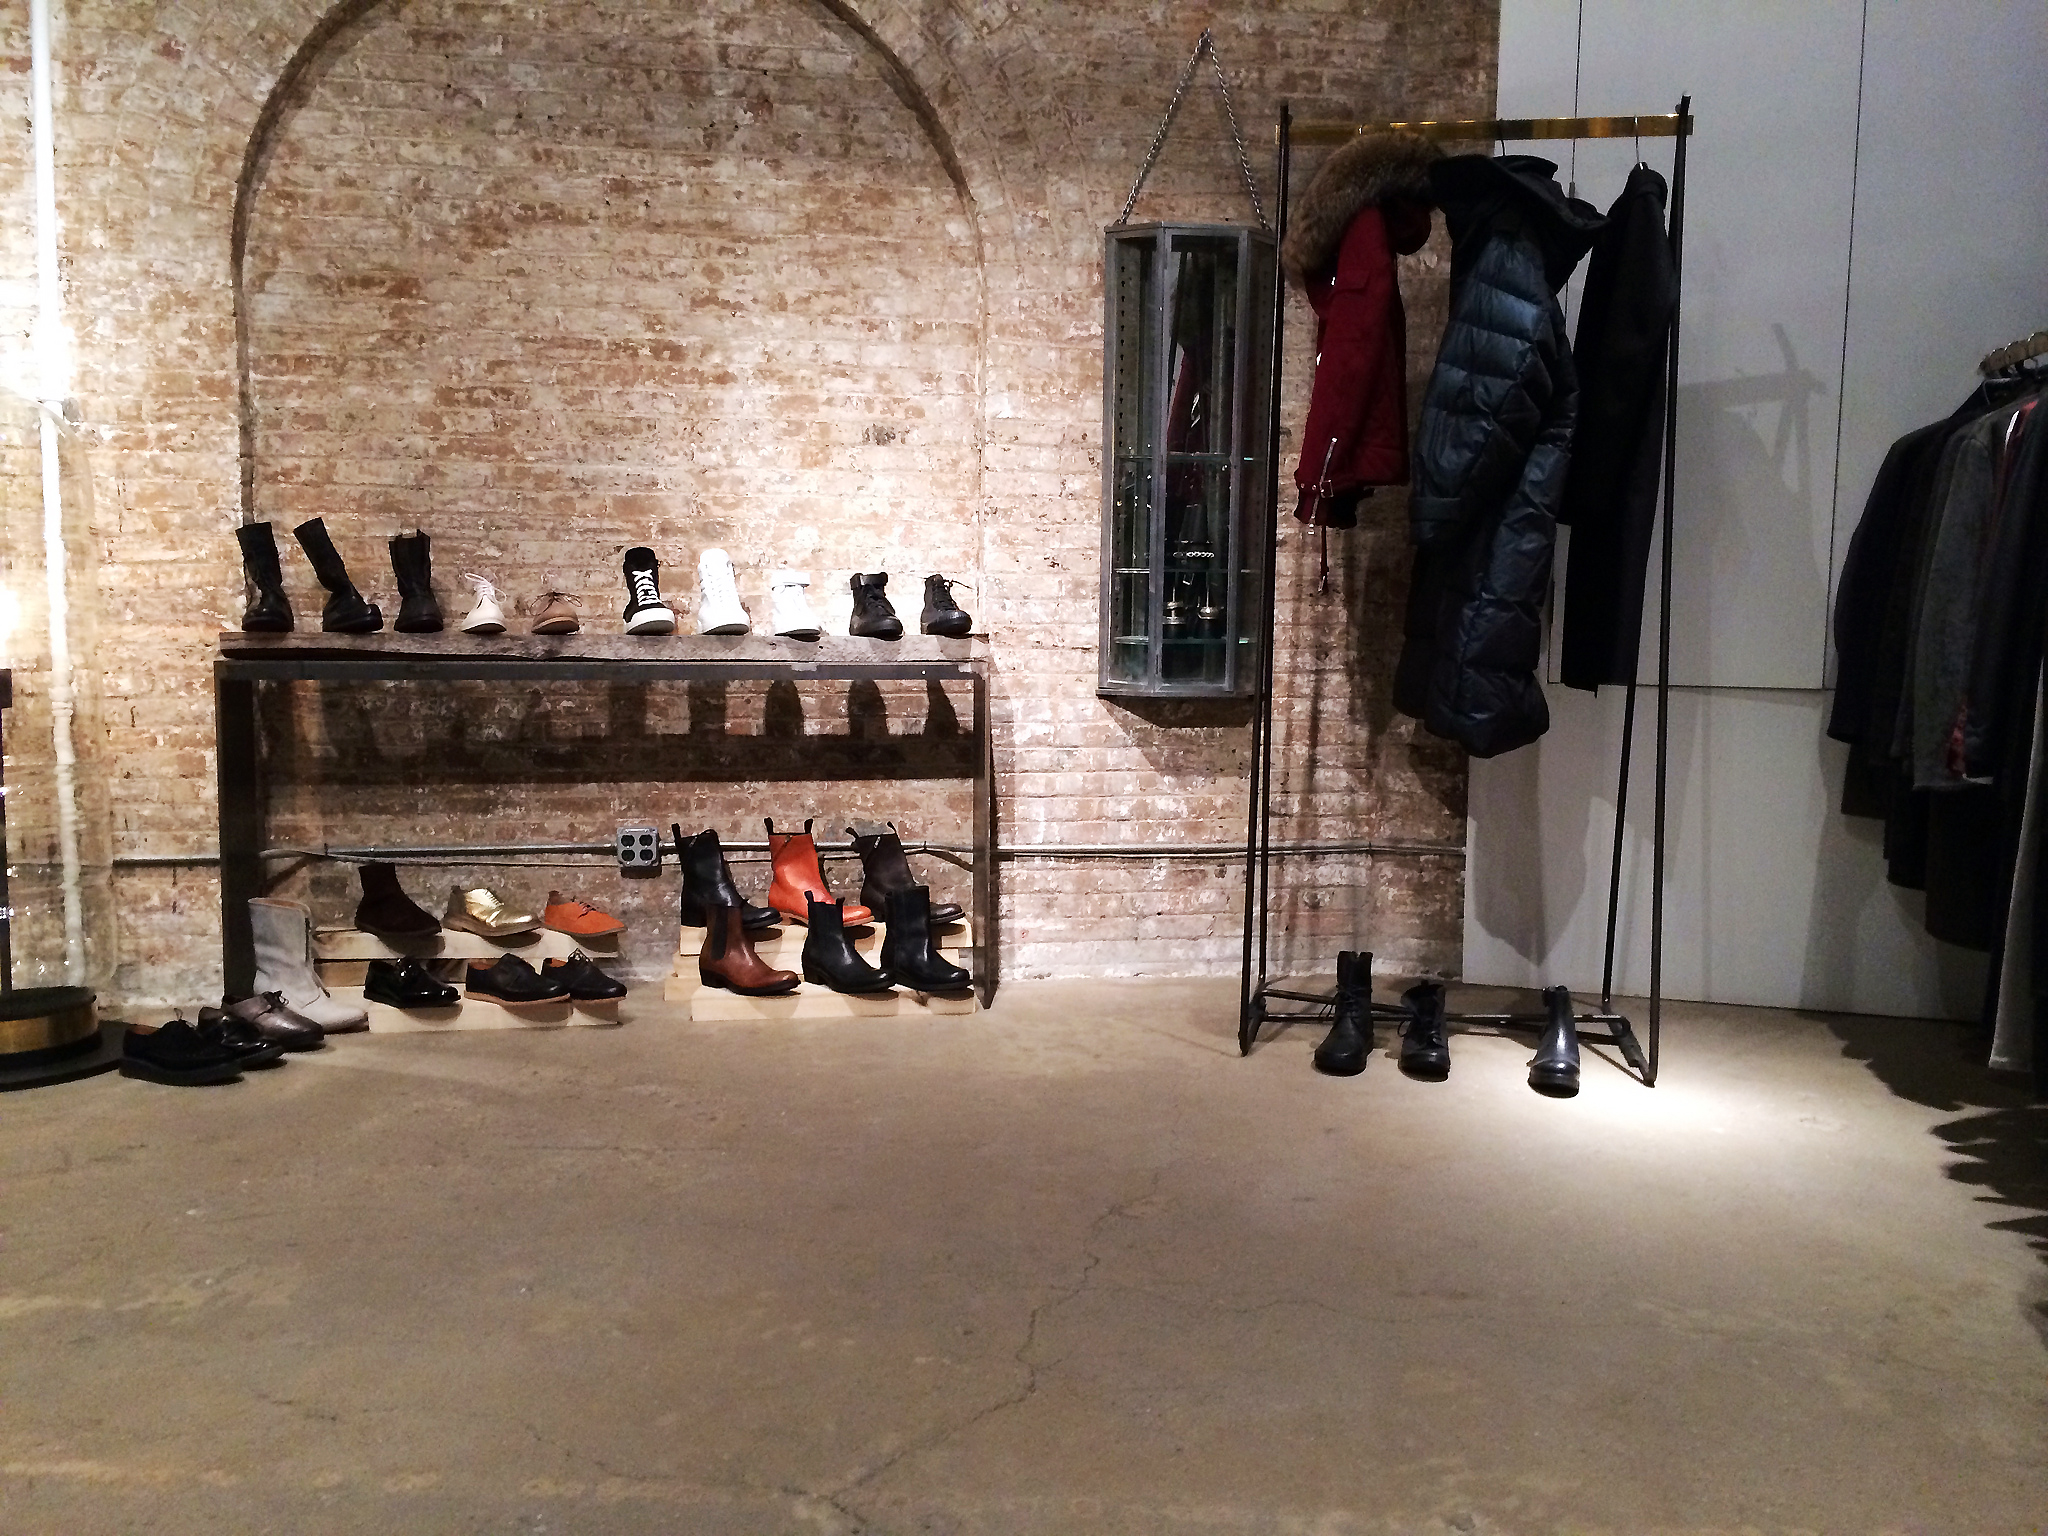 Menswear and shoes at Patrons of the New. in New York. Photo by alphacityguides.